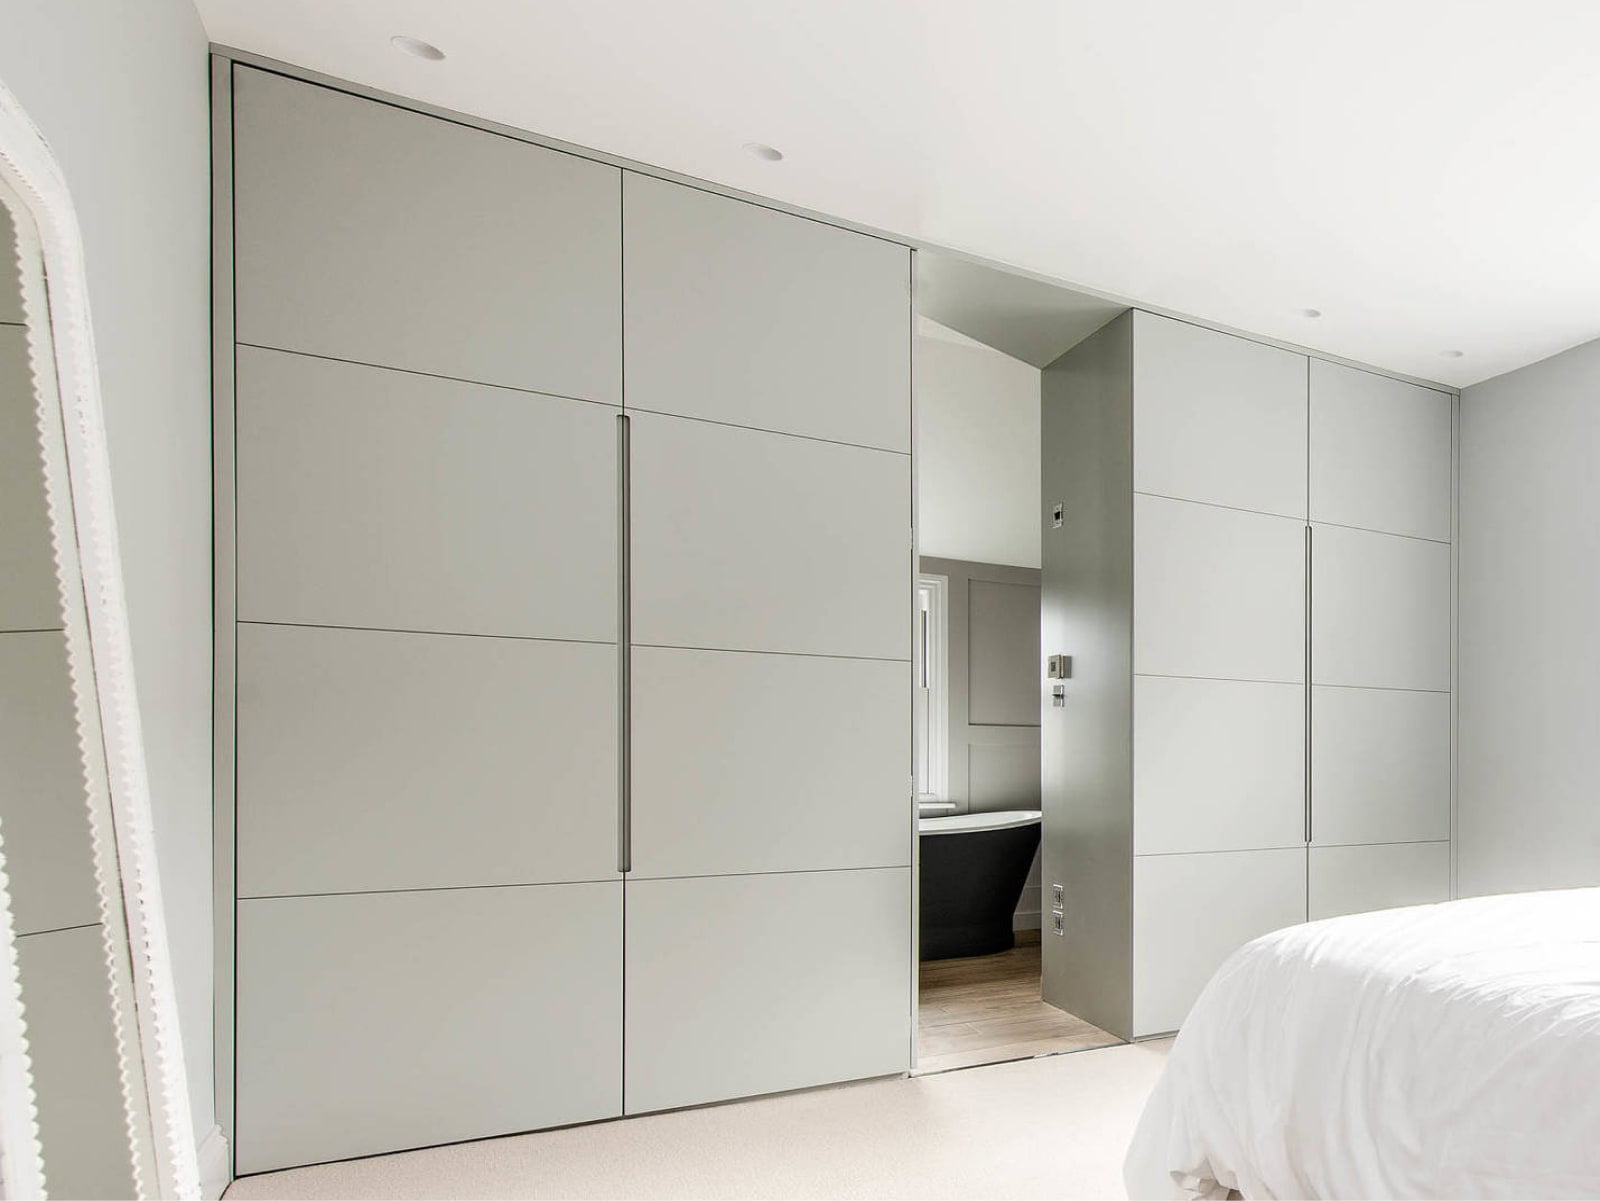 Built in Wardrobes | Bespoke Fitted Wardrobes in Dublin